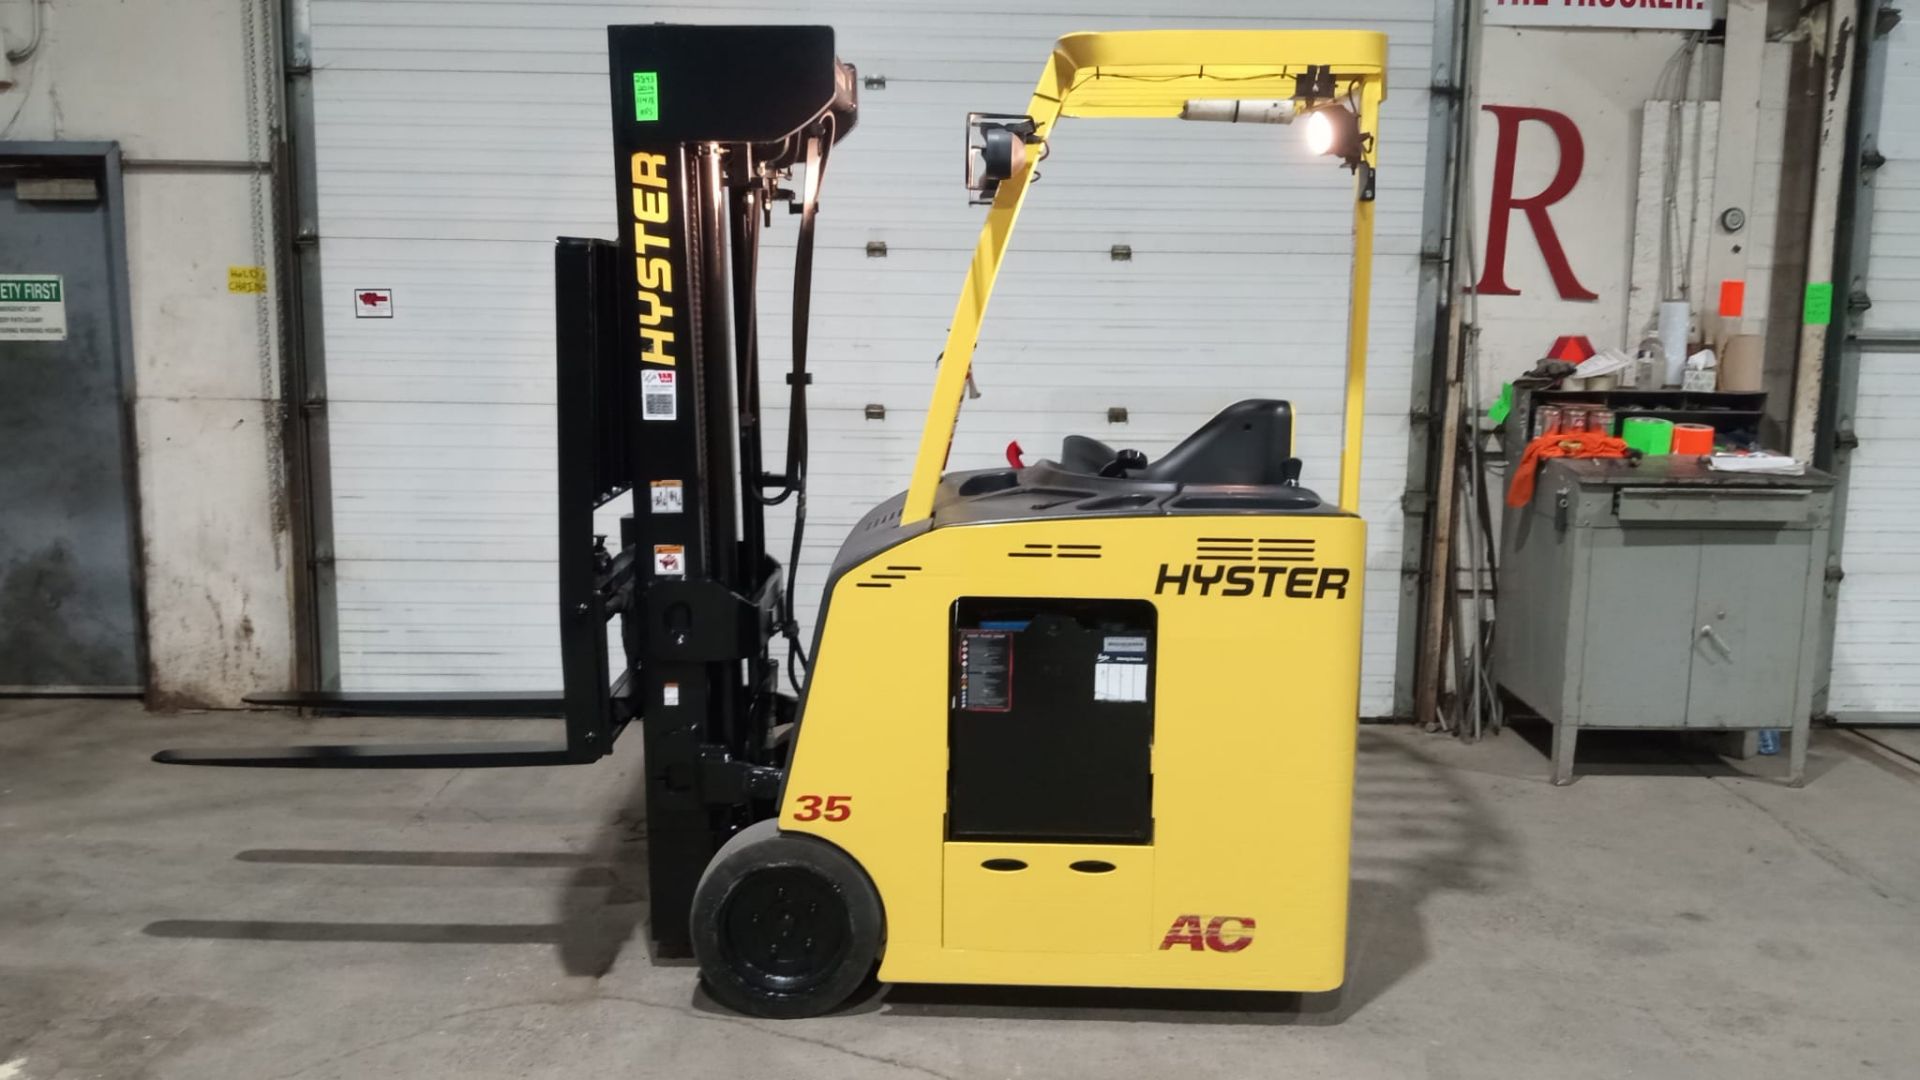 2014 Hyster 3,500lbs Capacity Electric Stand On Forklift 4-STAGE MAST 36V with sideshift - FREE